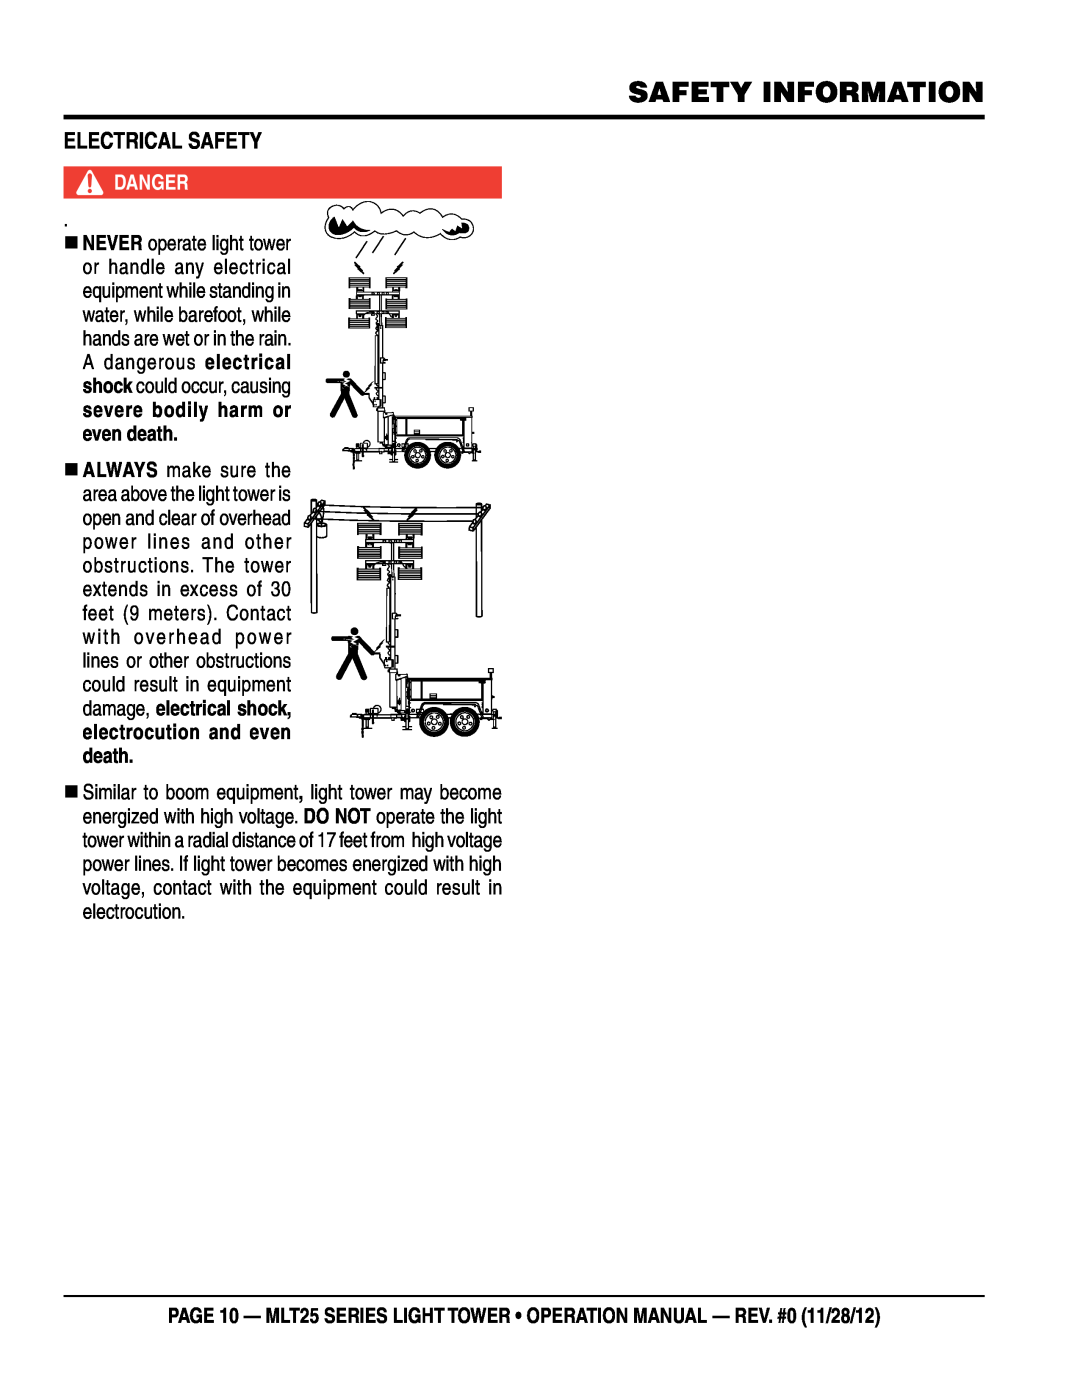 Multiquip MLT25 operation manual eLeCTRICaL saFeTY, Safety Information, DangeR, „ neveR operate light tower 